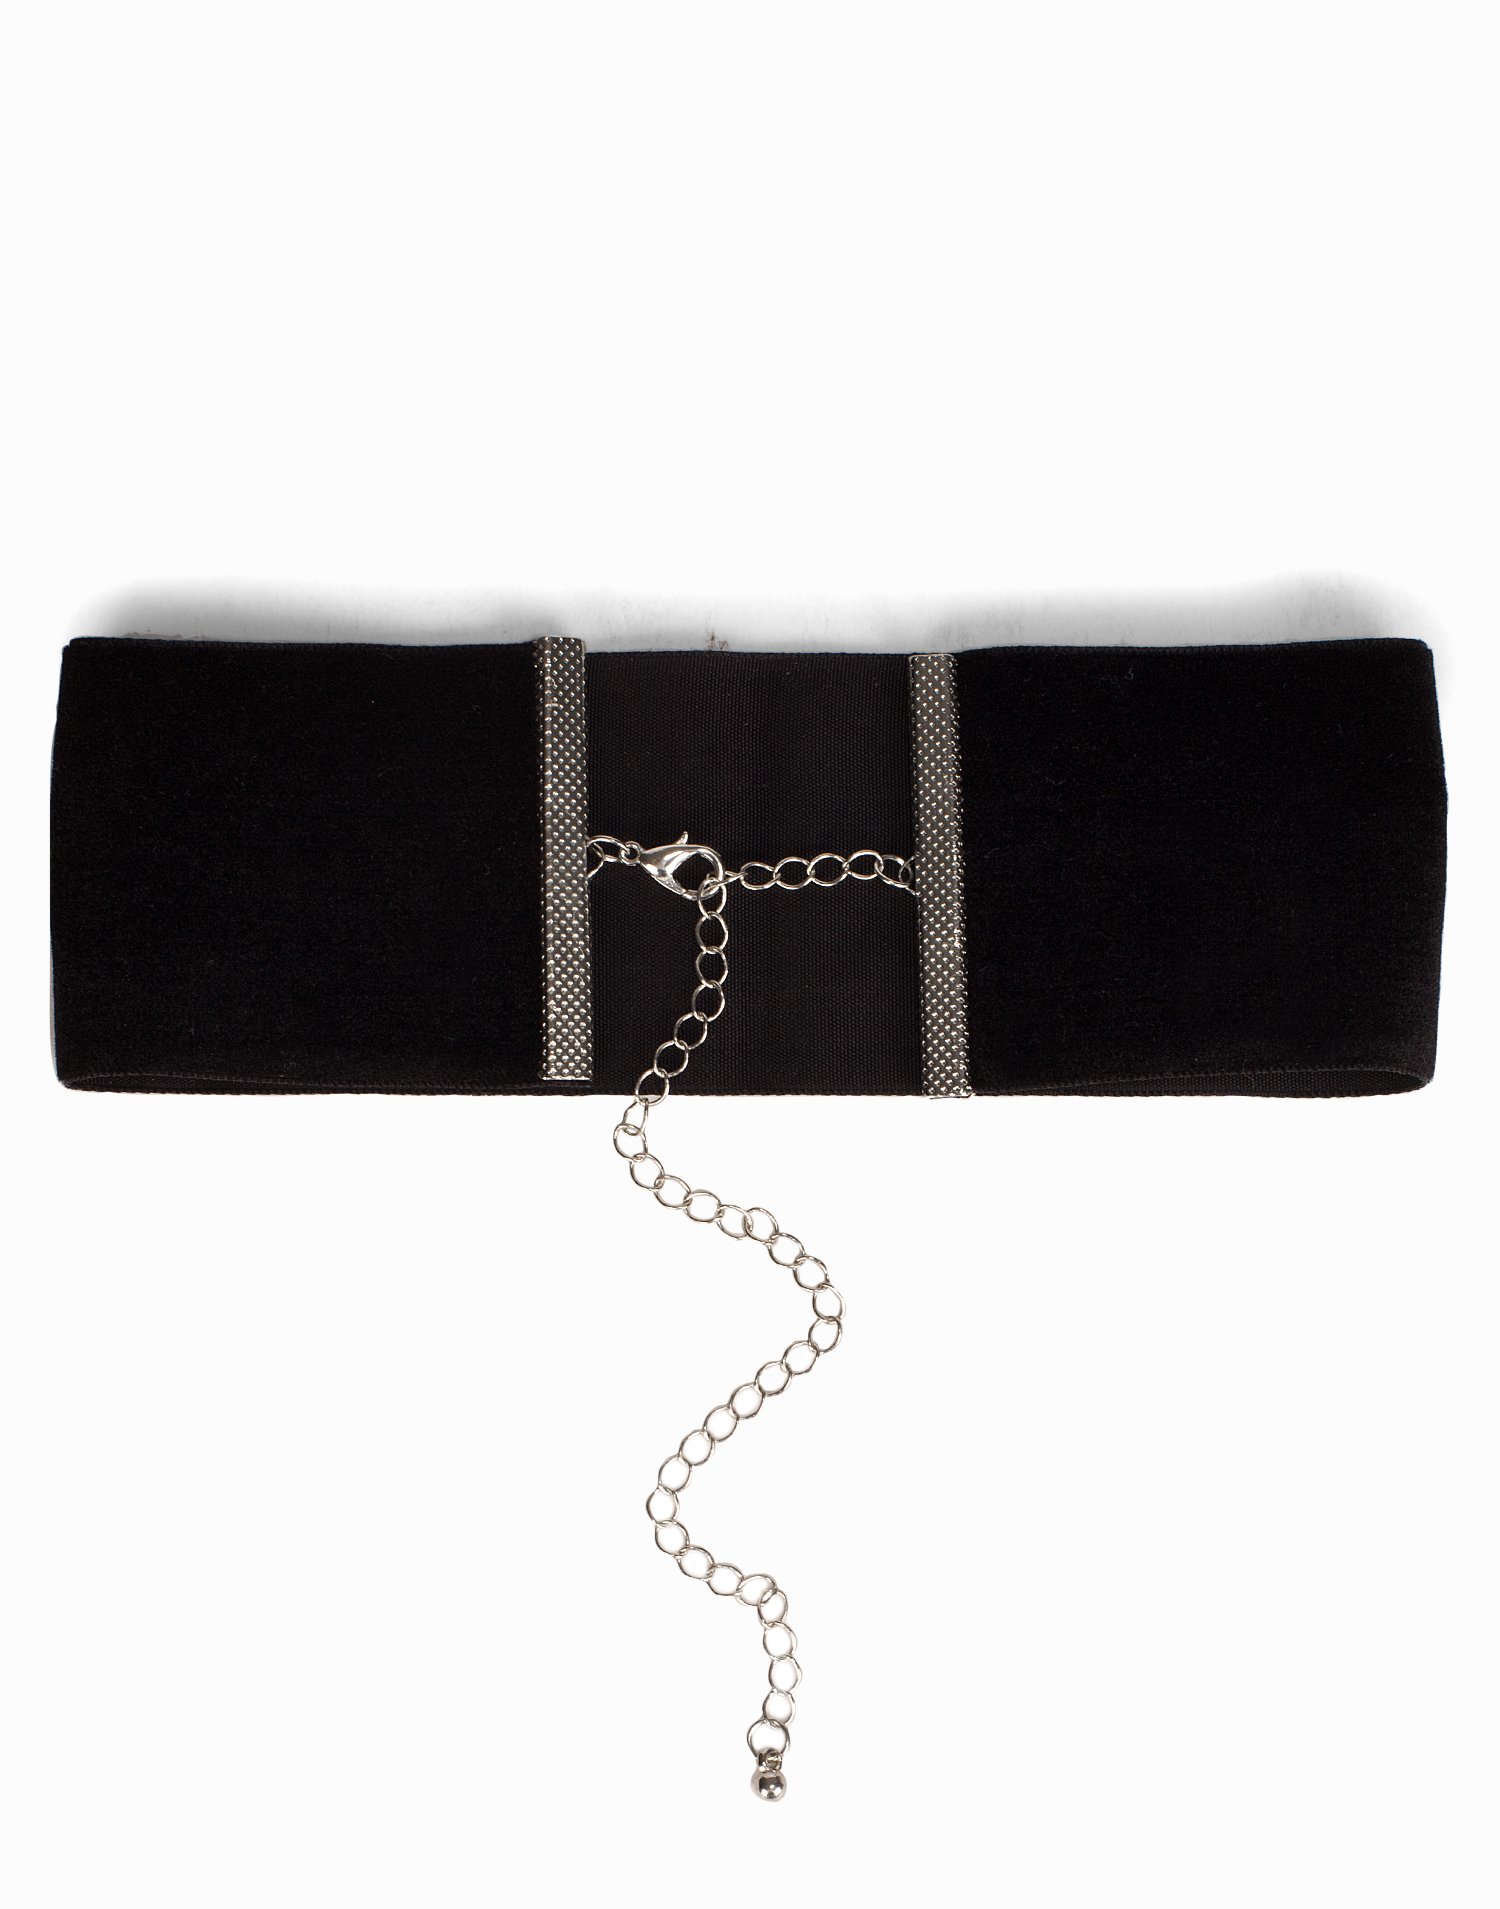 Wide Velvet Choker - Nly Accessories - Black - Jewellery - Accessories ...